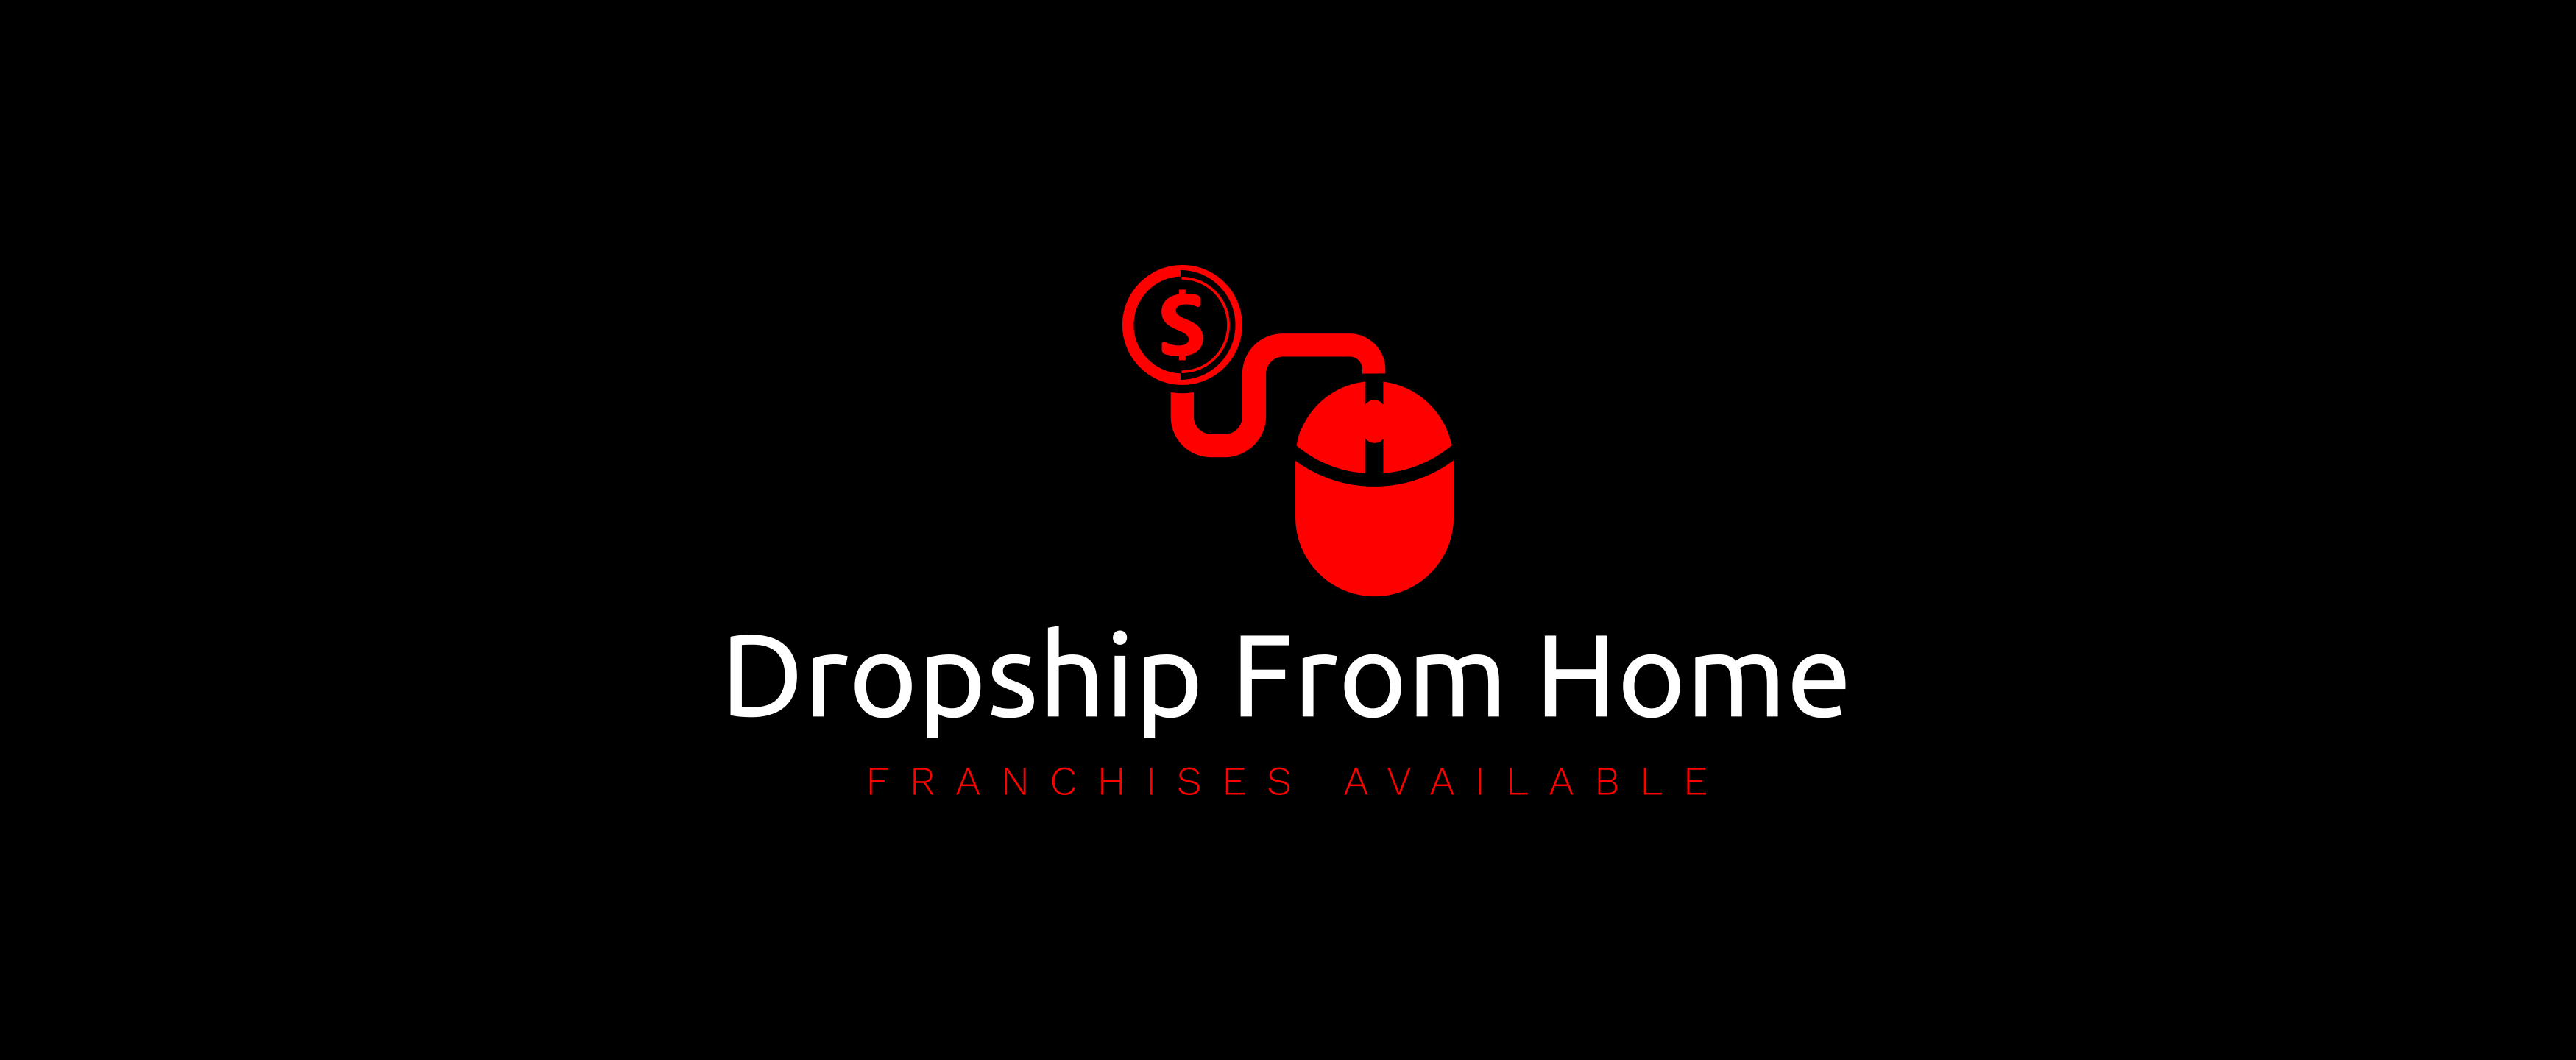 Dropship From Home